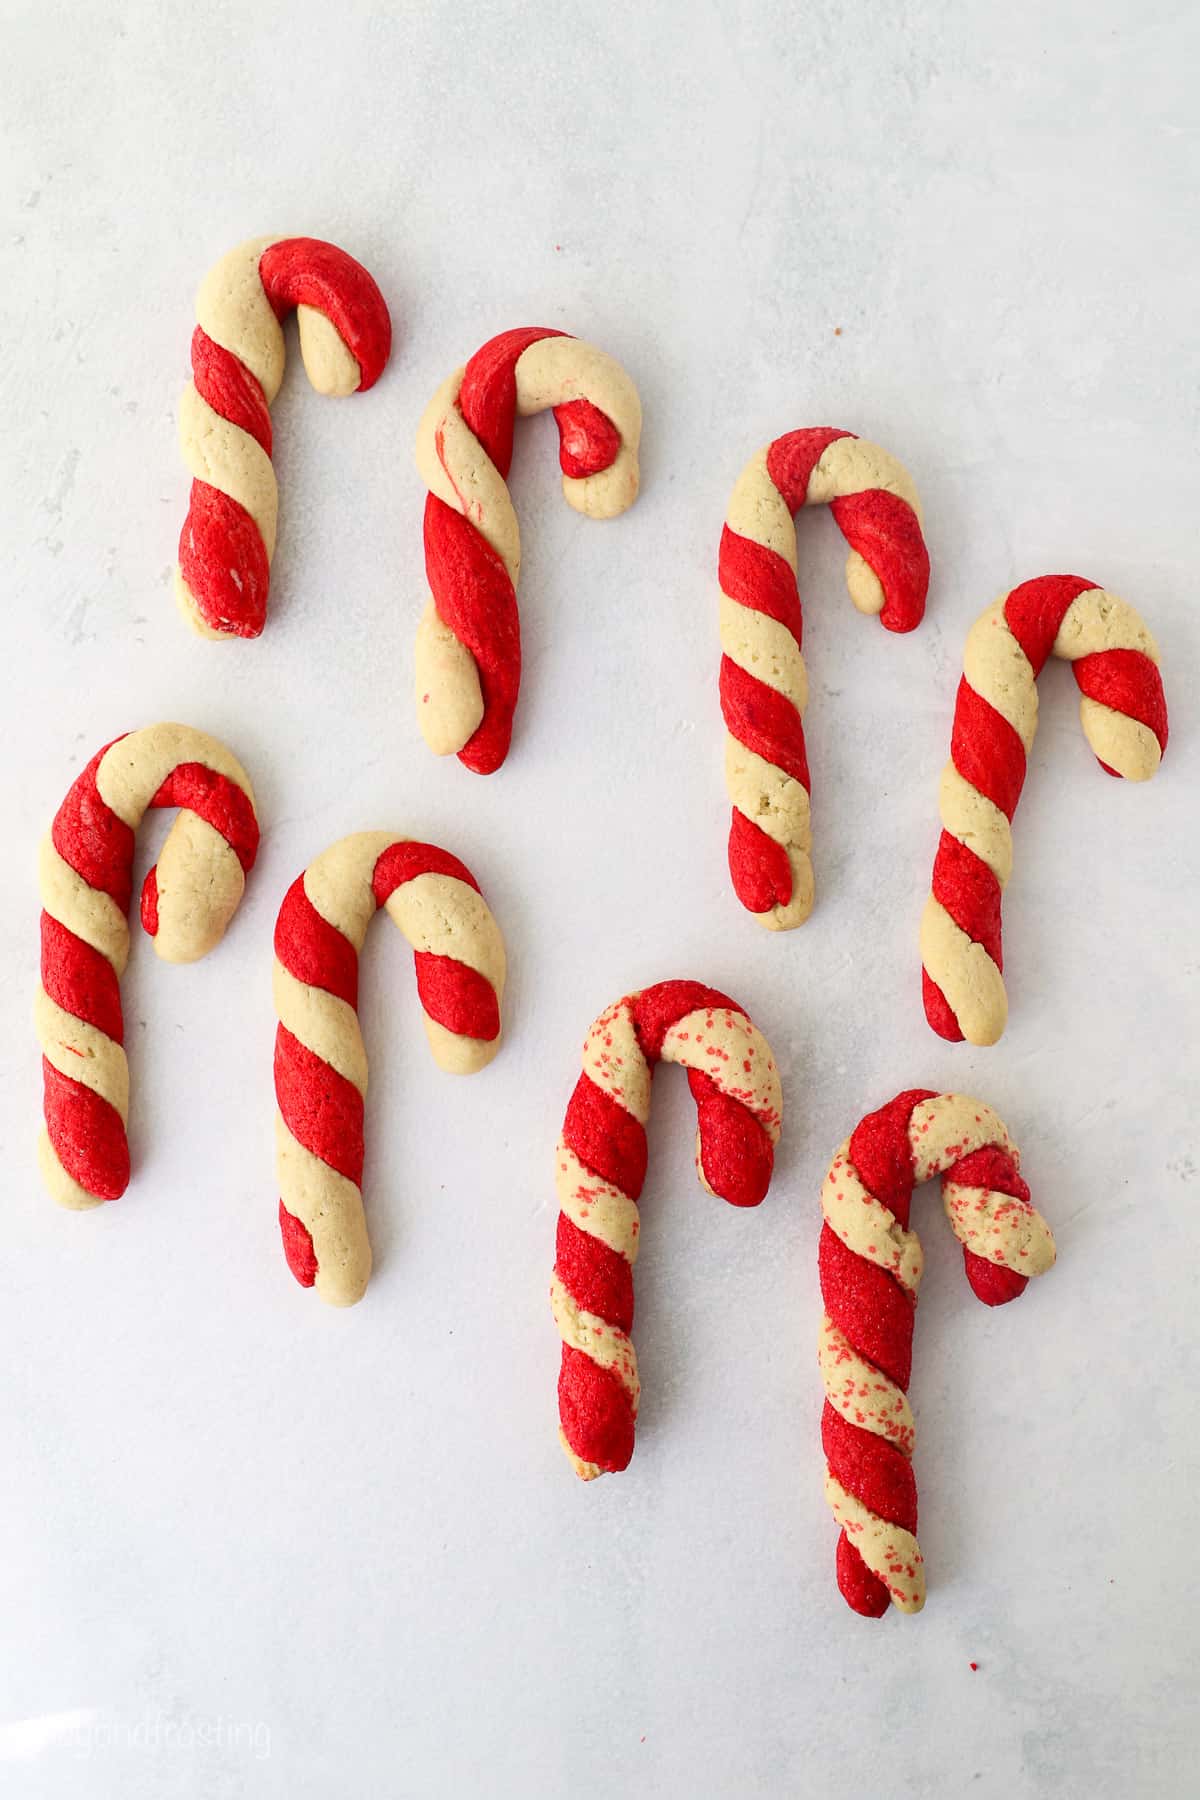 Candy cane cookies lined up in two rows on a white surface.